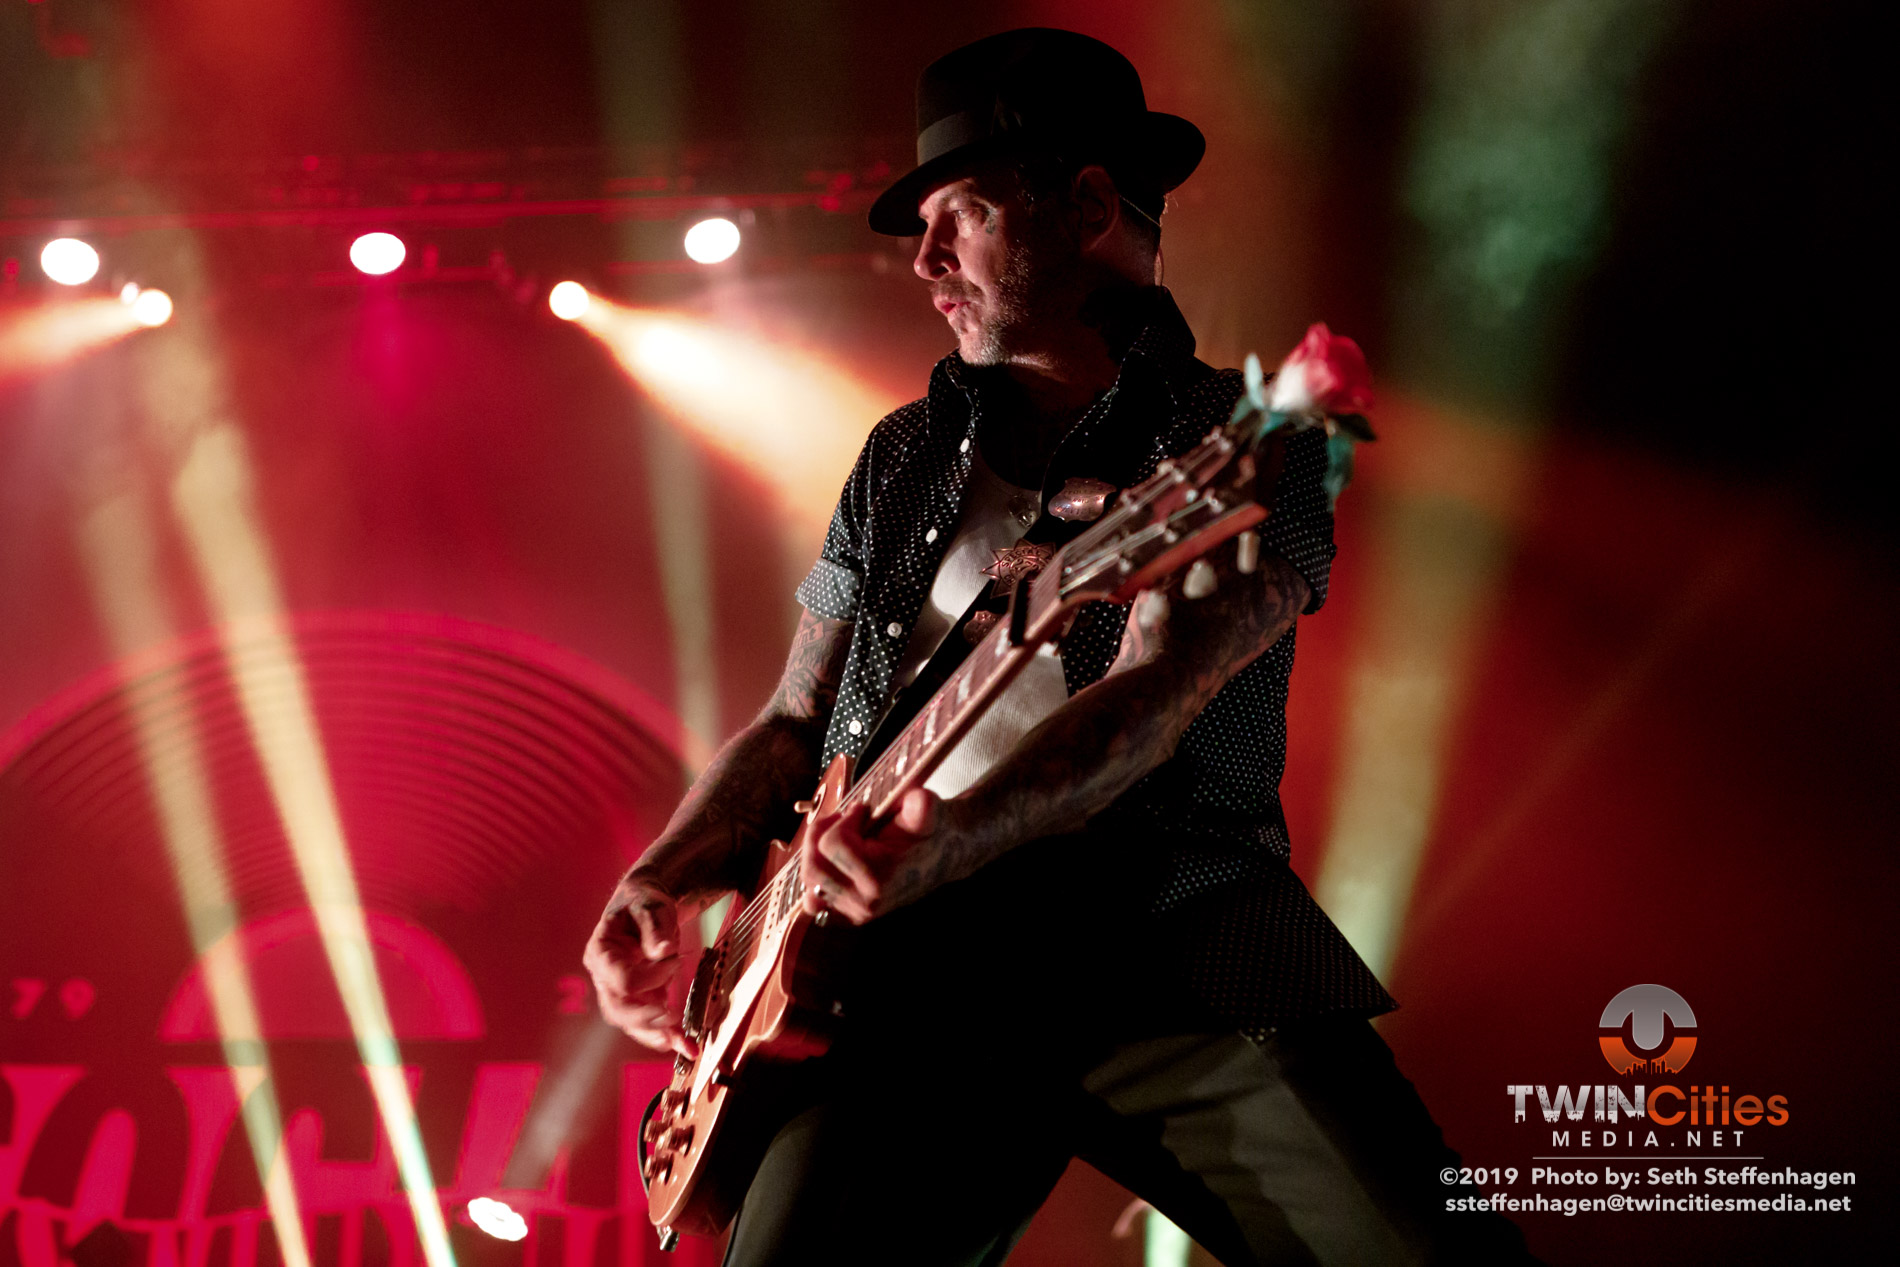 September 8, 2019 - Minneapolis, Minnesota, United States - Social Distortion live in concert at the The Armory. Co-headlining with Flogging Molly along with The Devil Makes Three and Le Butcherettes as the openers.

(Photo by Seth Steffenhagen/Steffenhagen Photography)